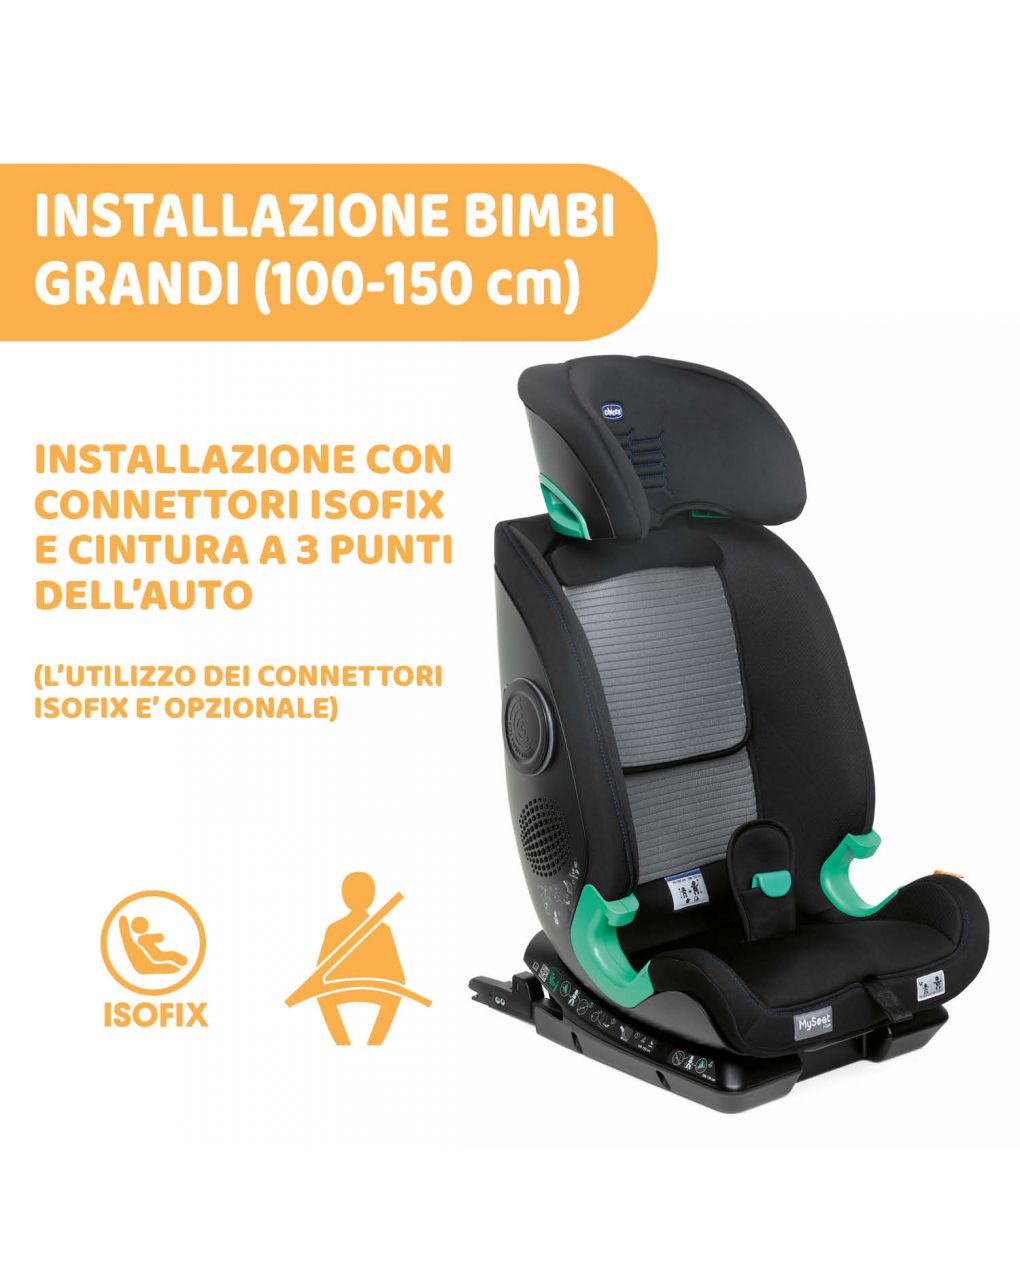 Chicco my seat i-size air black air - Chicco